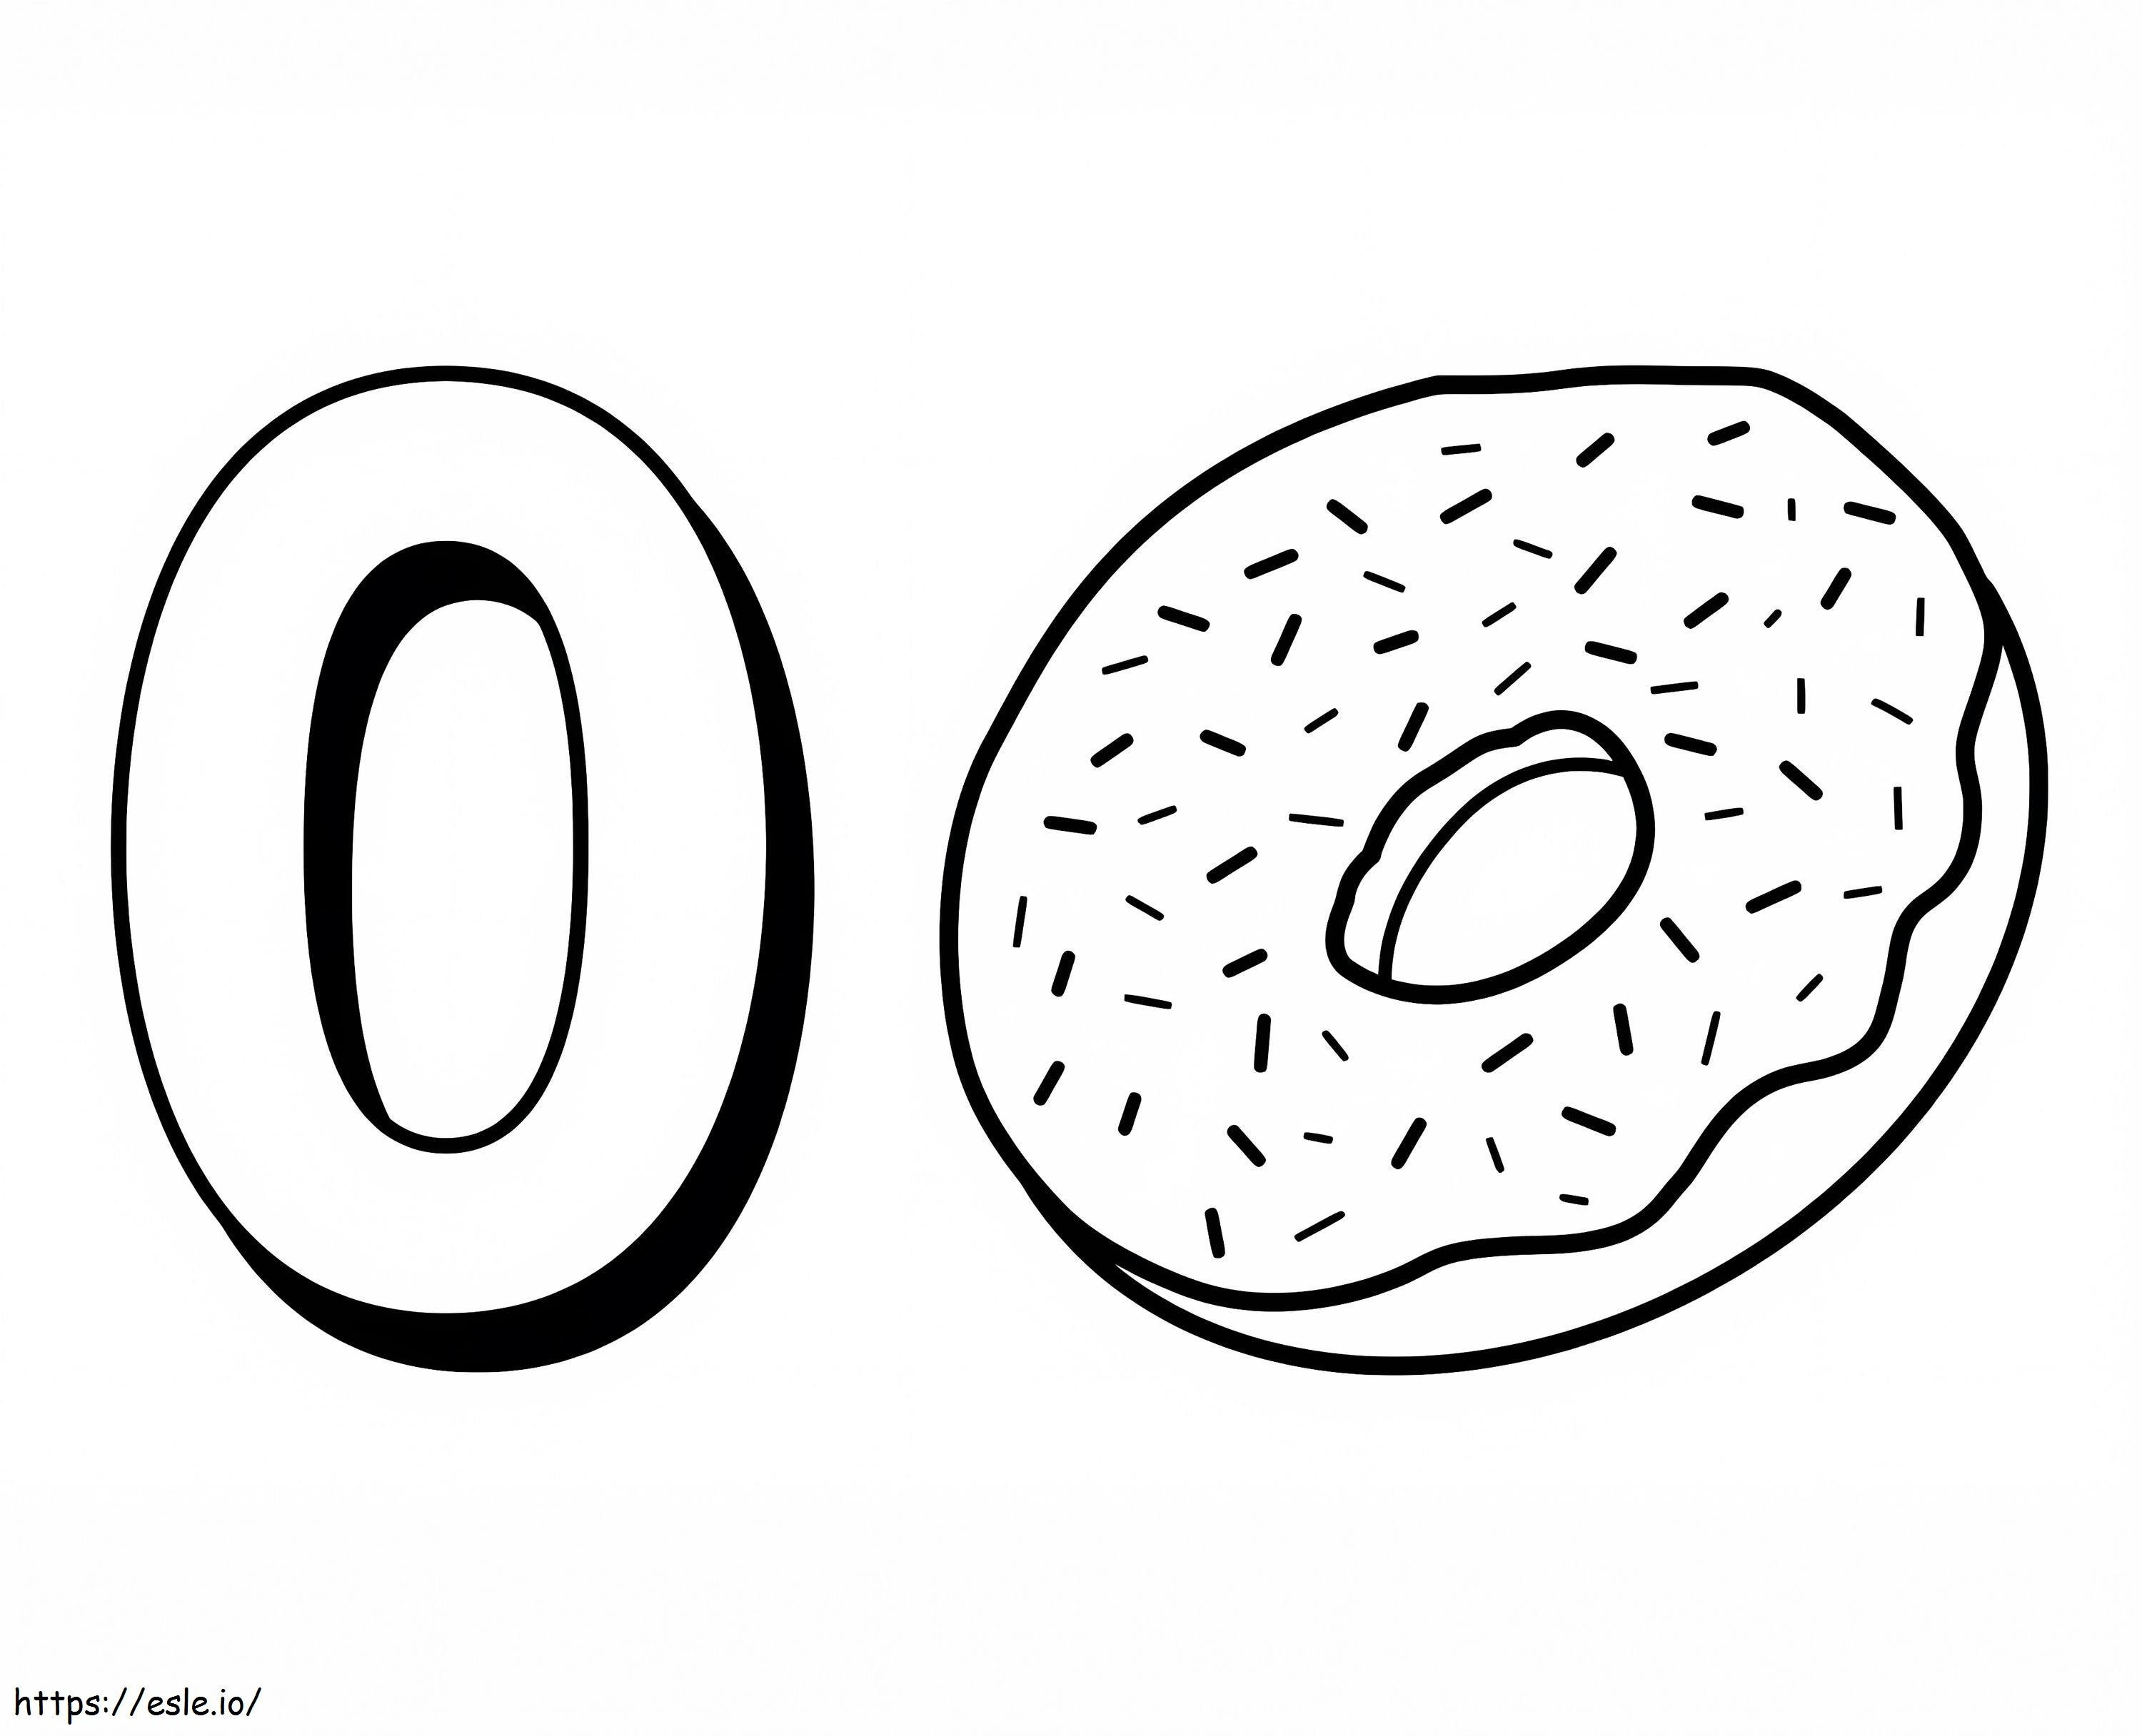 Donut And Number 0 coloring page